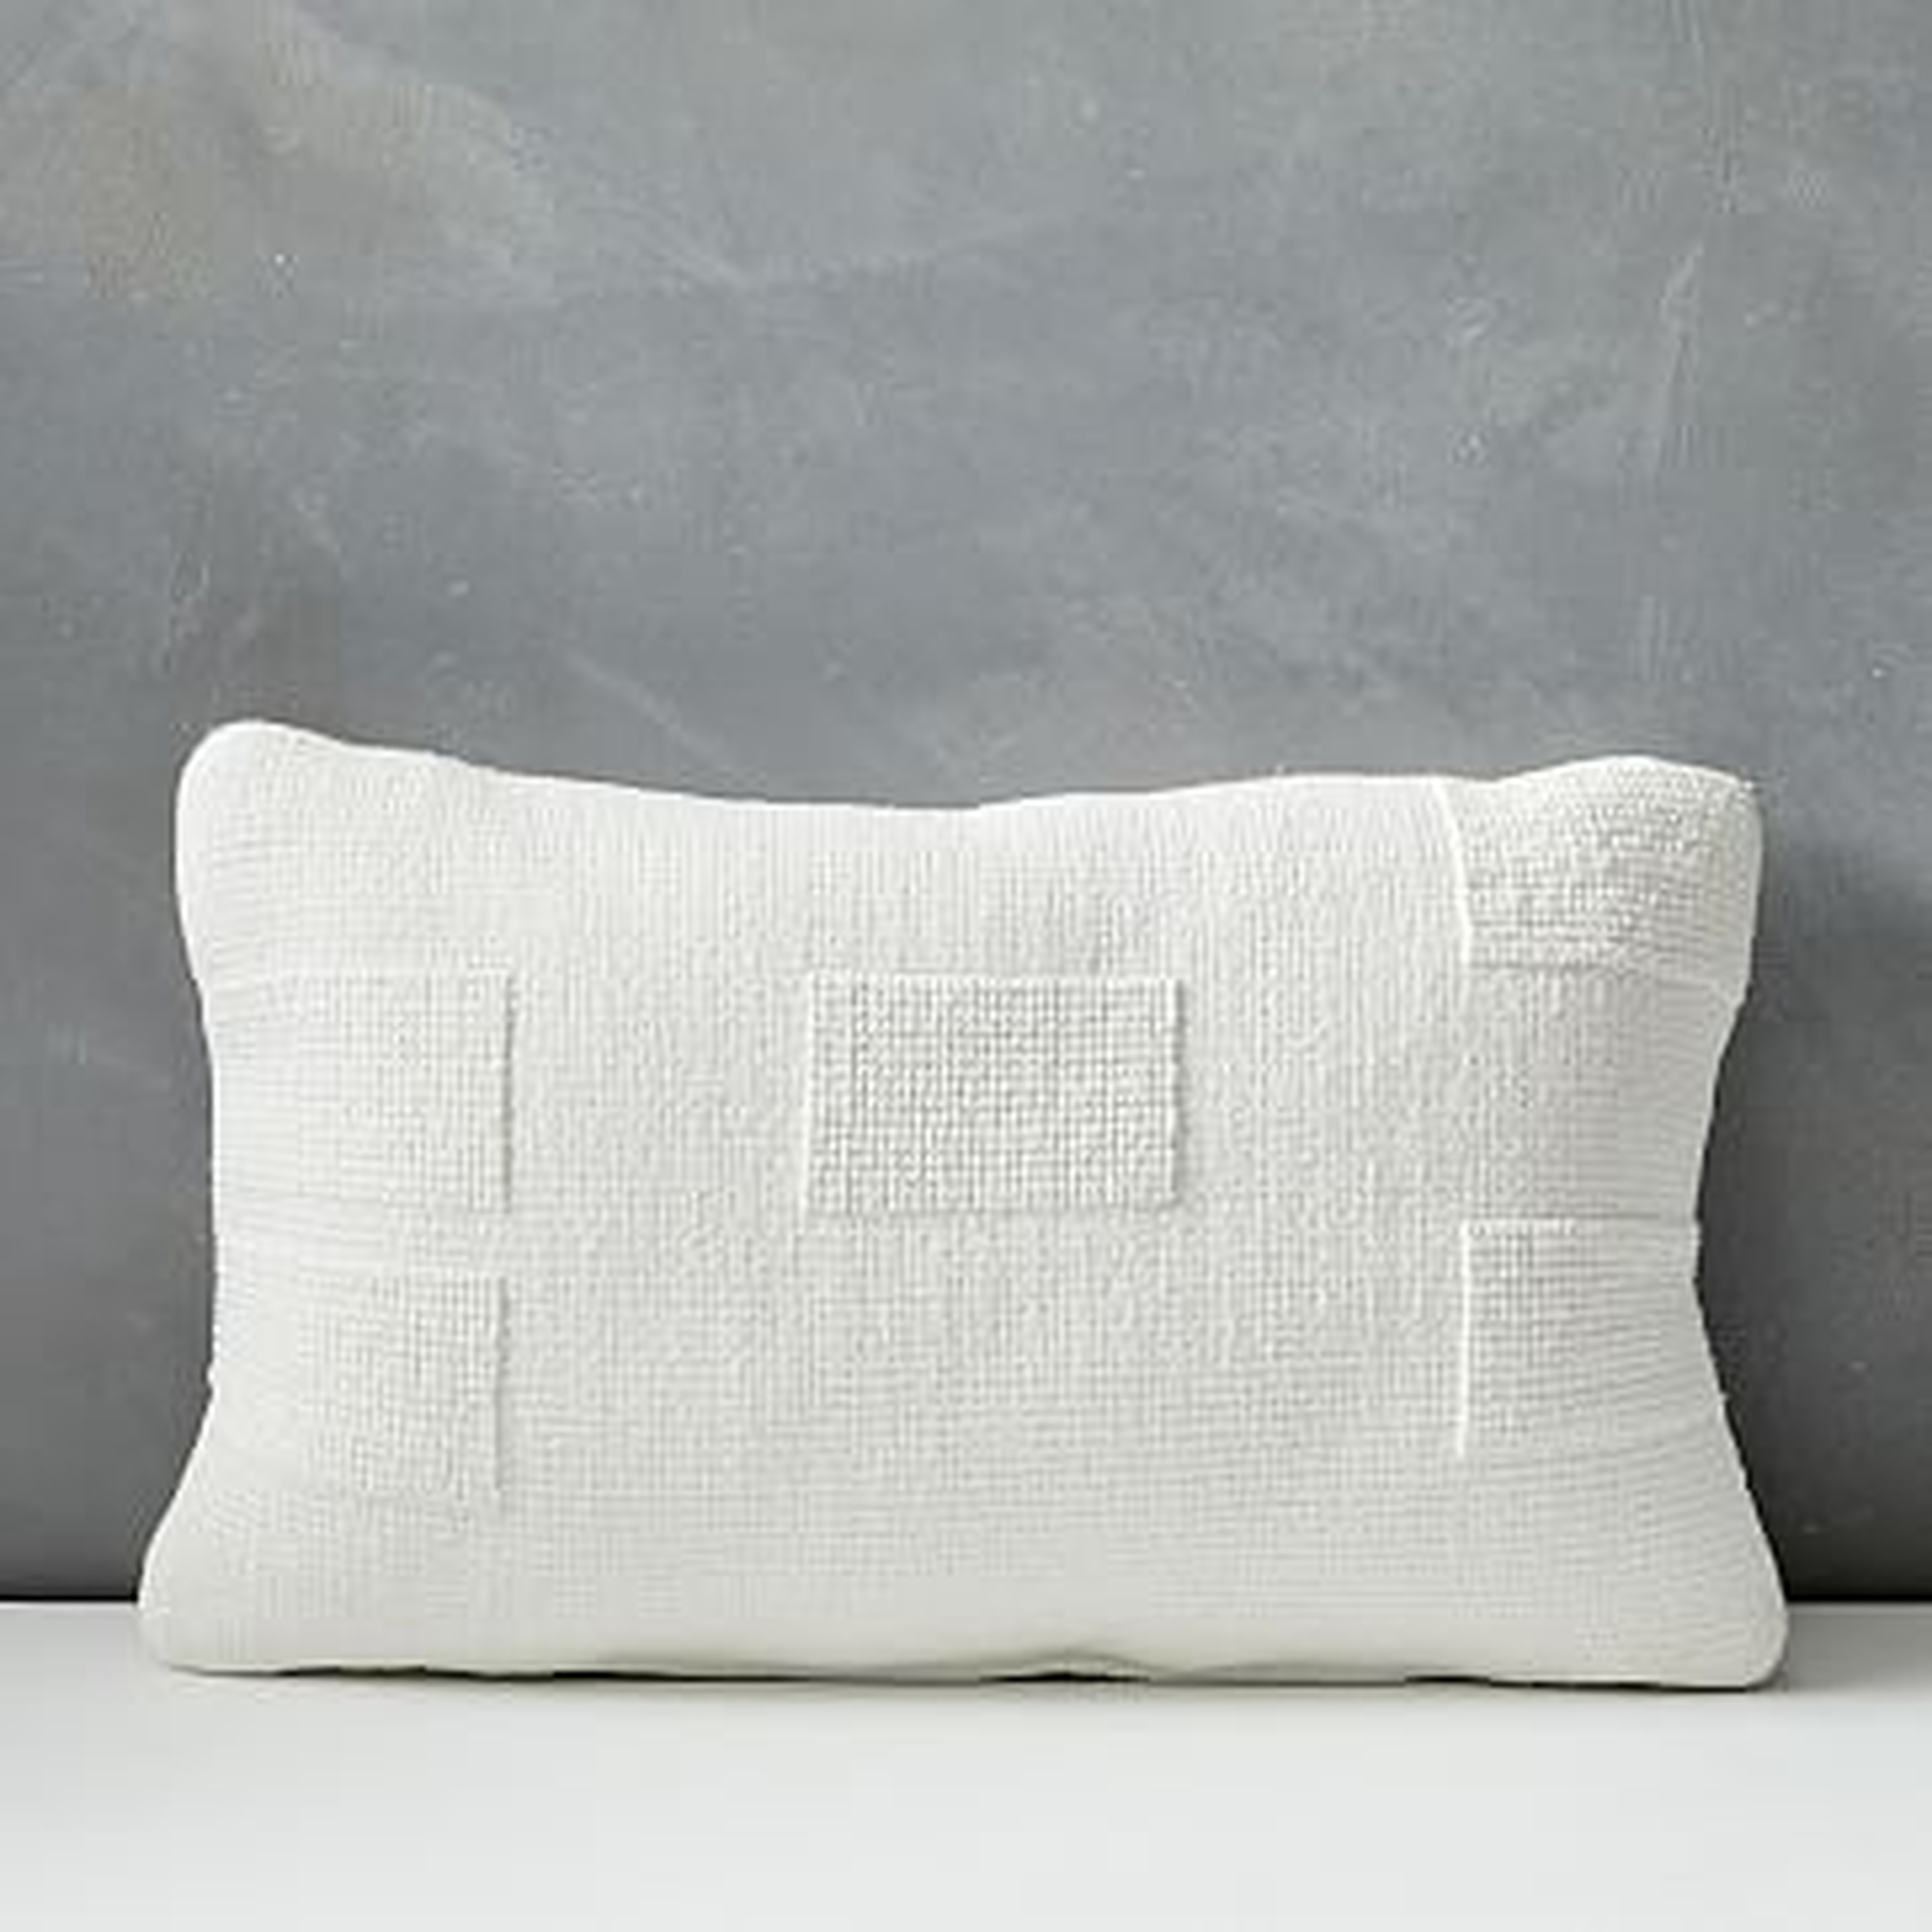 Outdoor Tufted Pillow, 12"x21", White - West Elm